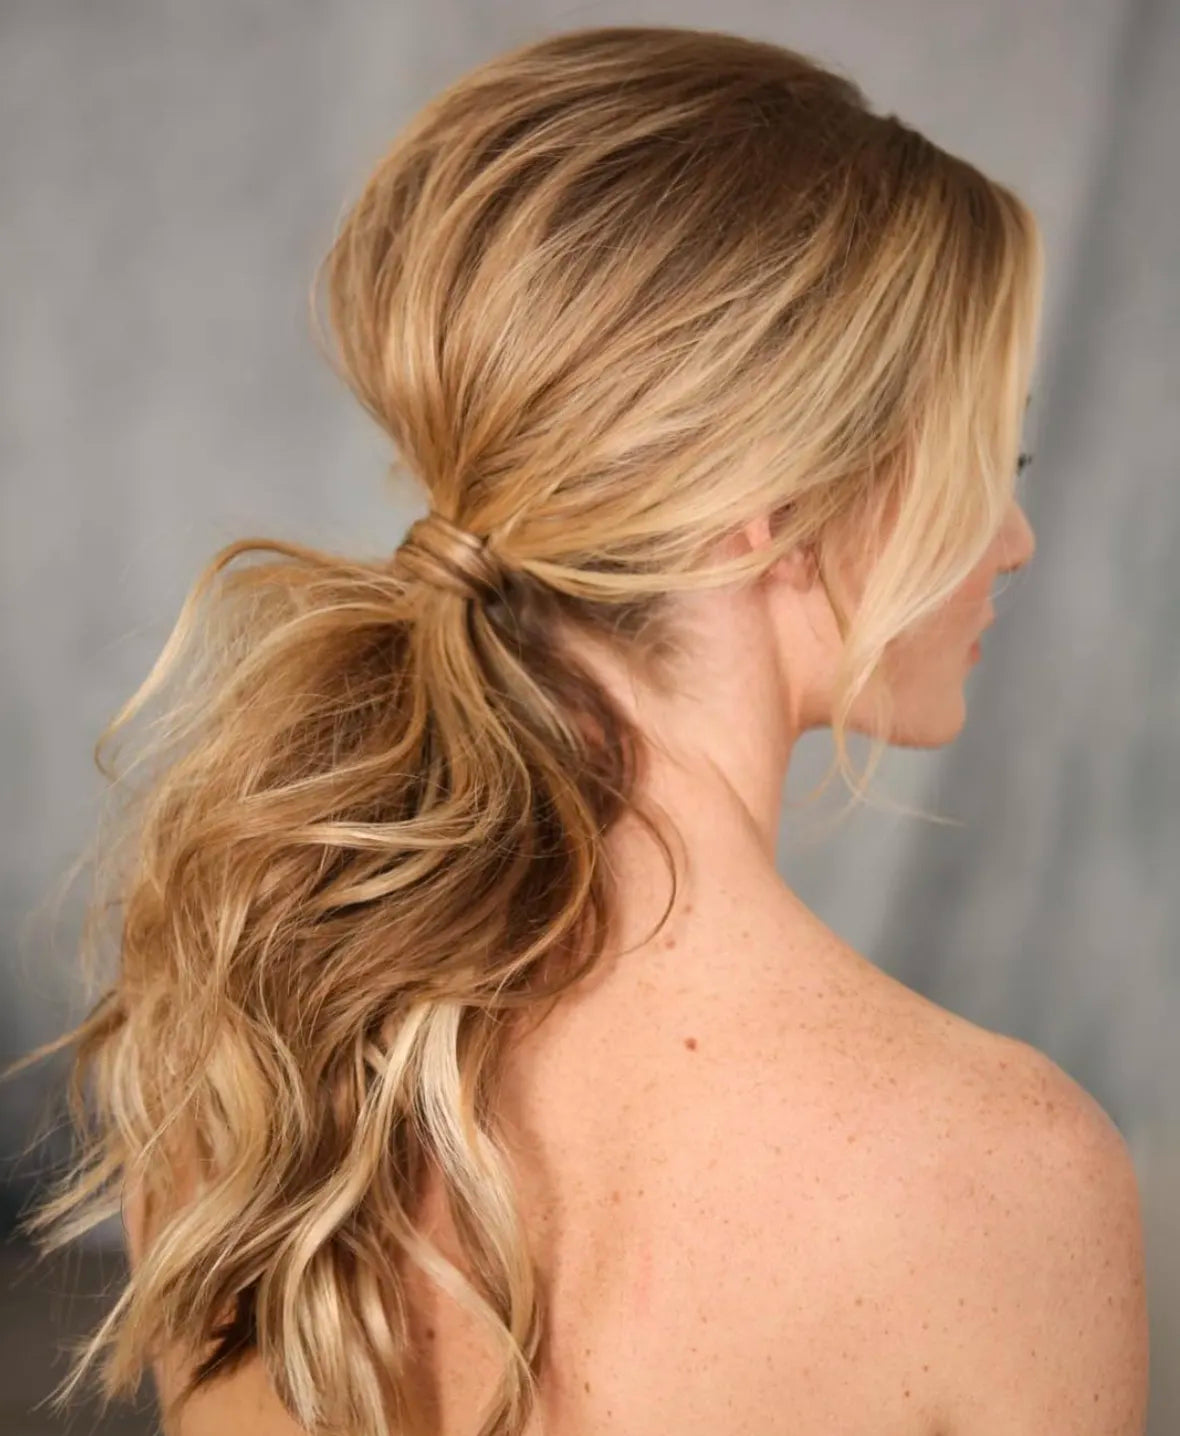 Blonde model showing off a low ponytail hairstyle.